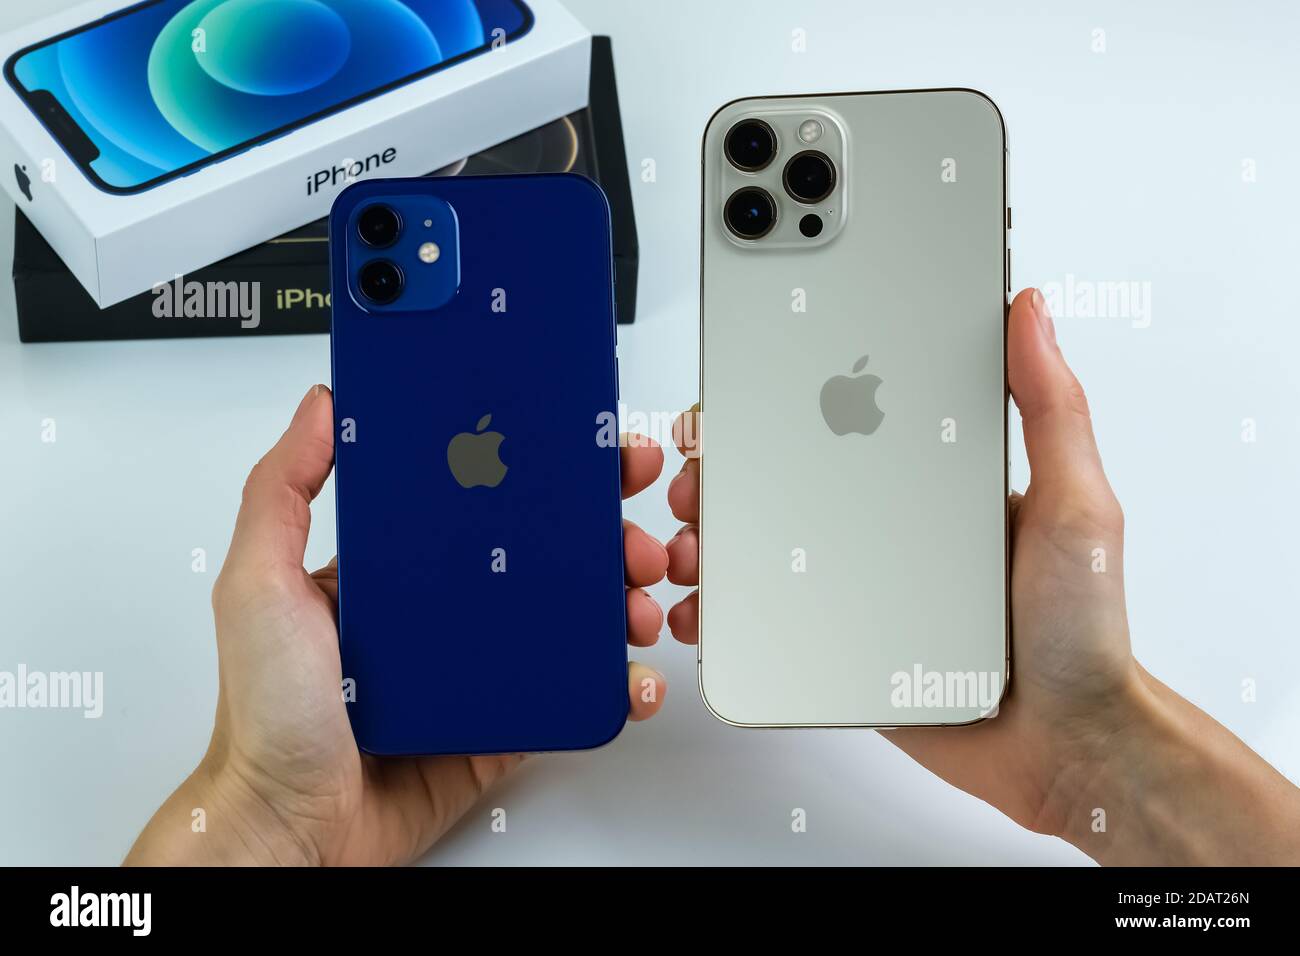 Iphone 12 Pro Max In Gold Next To Iphone 12 In Blue Stock Photo Alamy